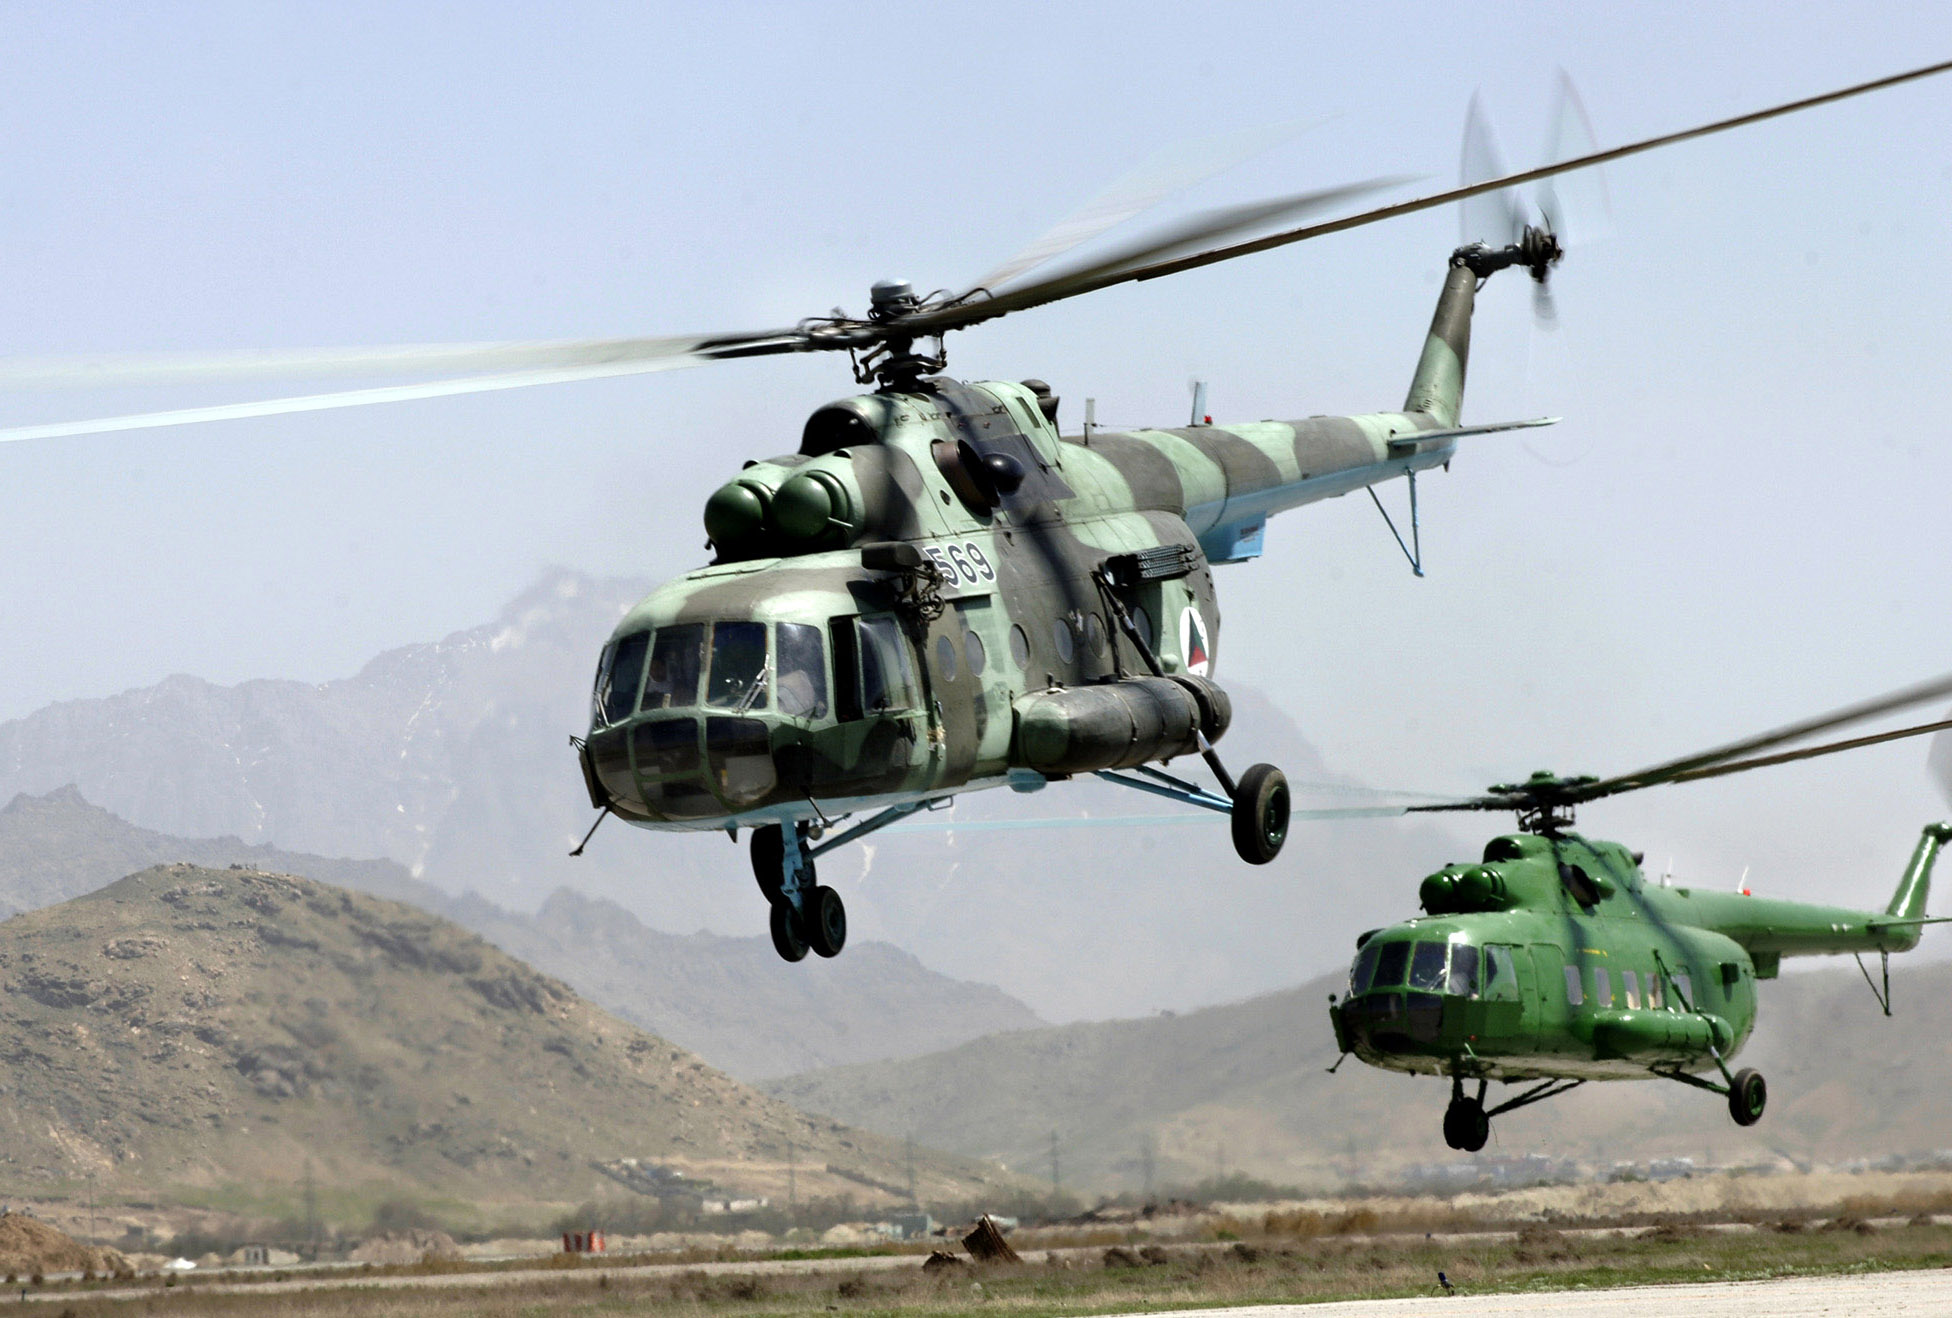 http://upload.wikimedia.org/wikipedia/commons/a/ae/Afghan_MI-17_helicopters.jpg